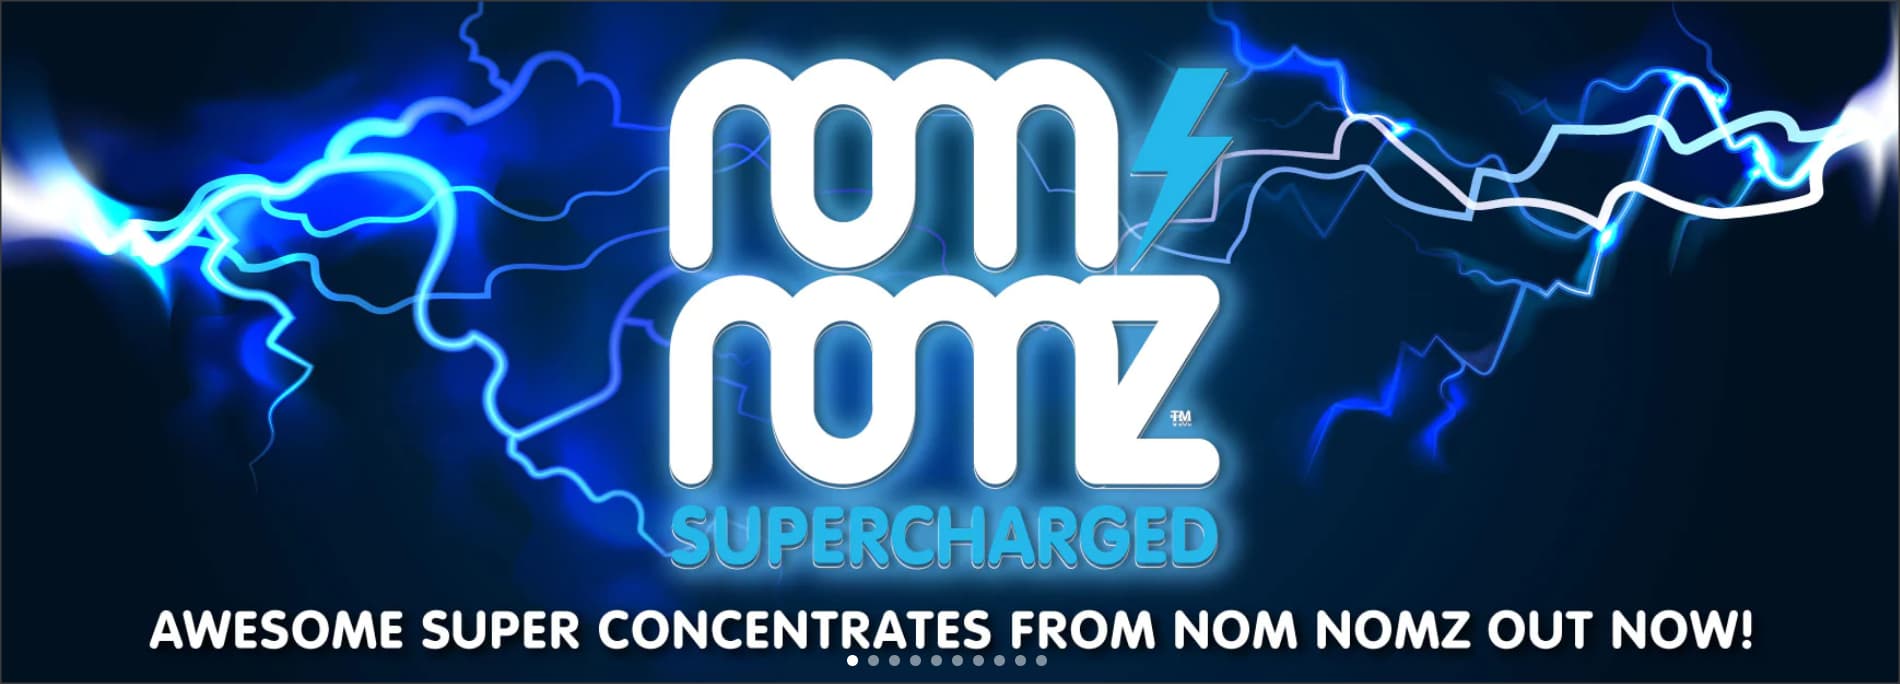 NEW NomNomz Super Concentrates (Super Charged) Reviewed by SessionDrummer  -- Testing Now! - Flavor tasting notes - E-Liquid Recipes Forum